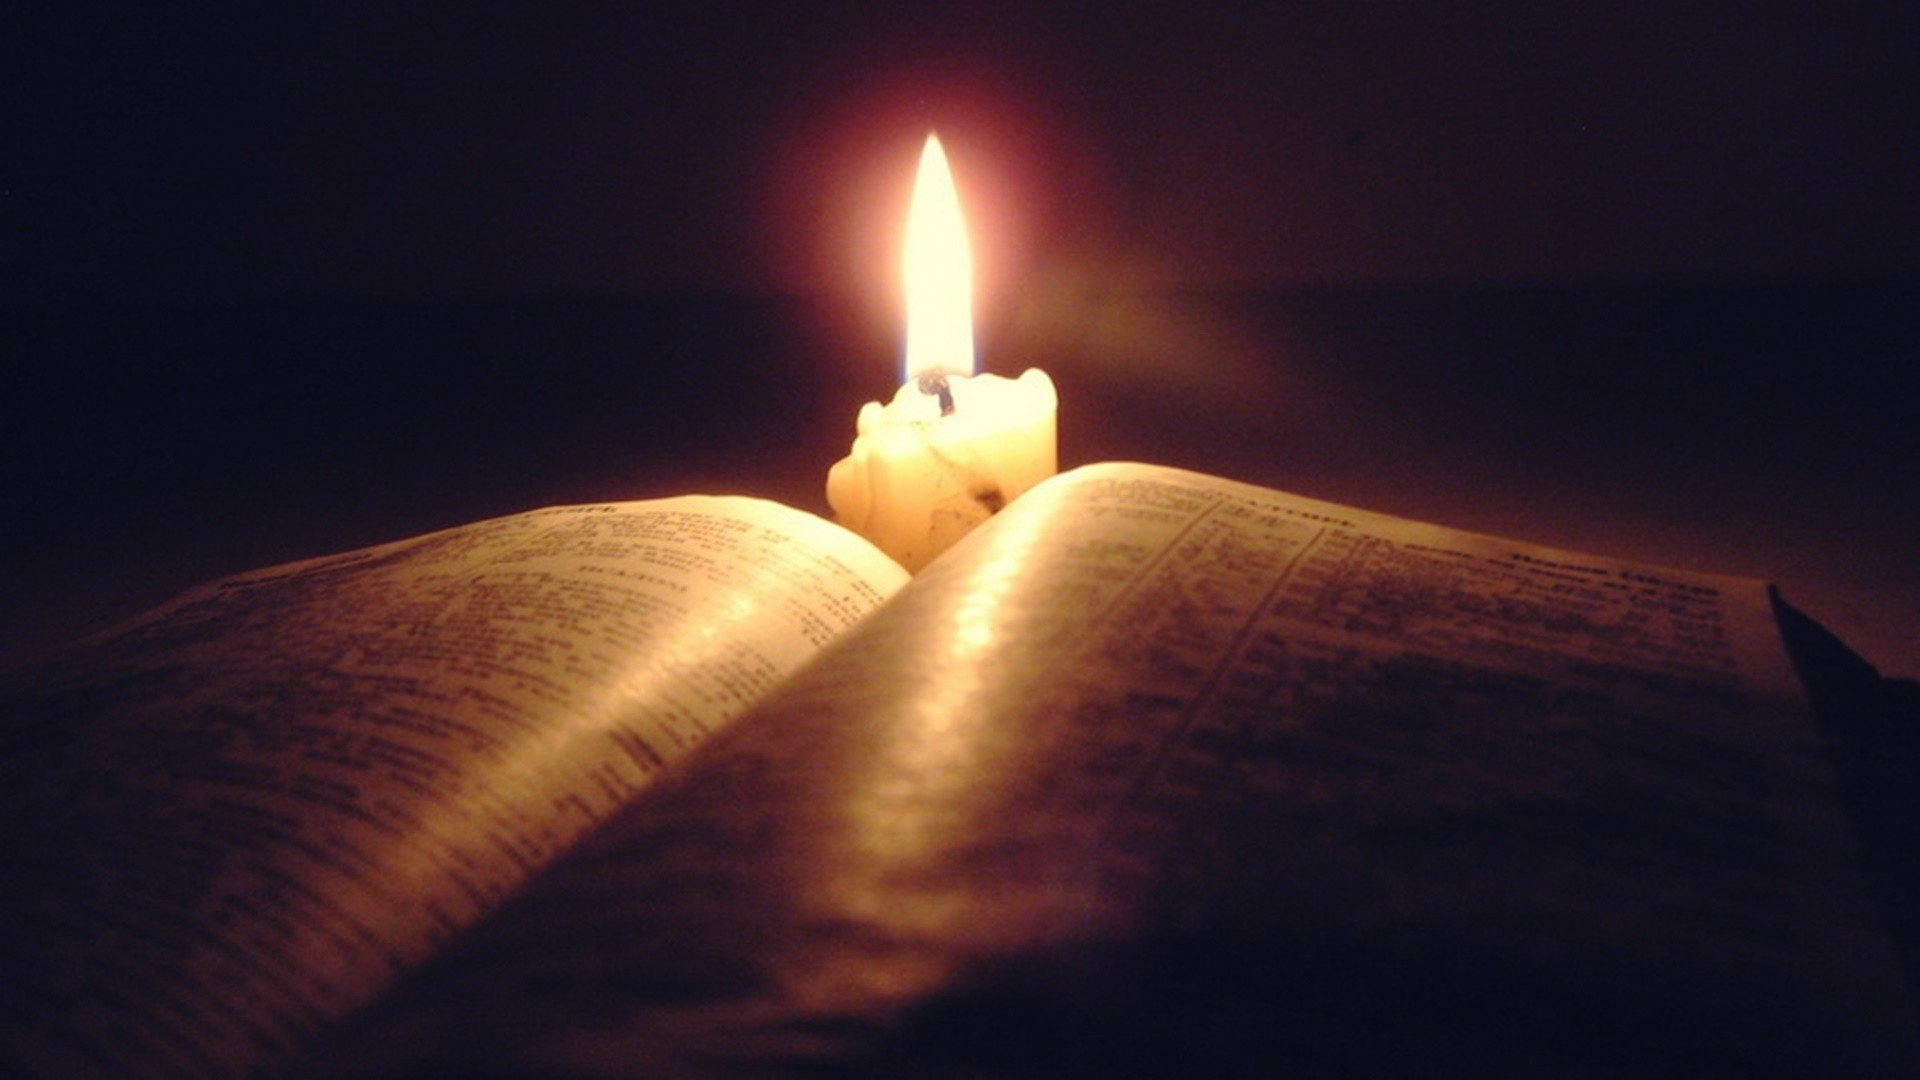 Wallpaper, 1920x1080 px, books, candles, Christianity, Holy Bible, lights 1920x1080